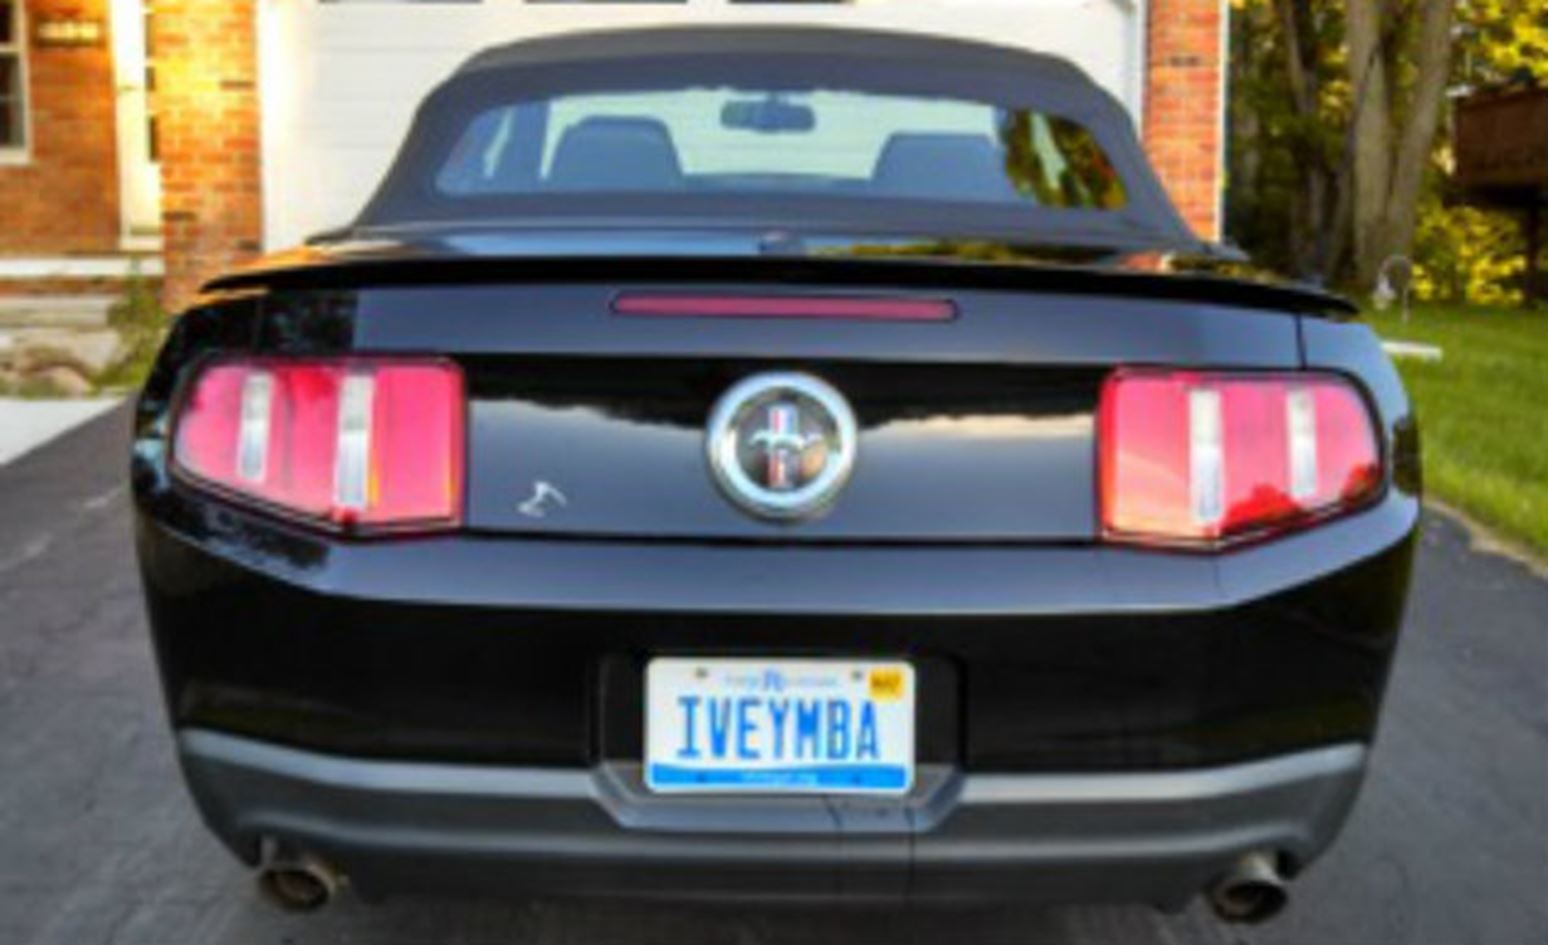 EMBA license plate